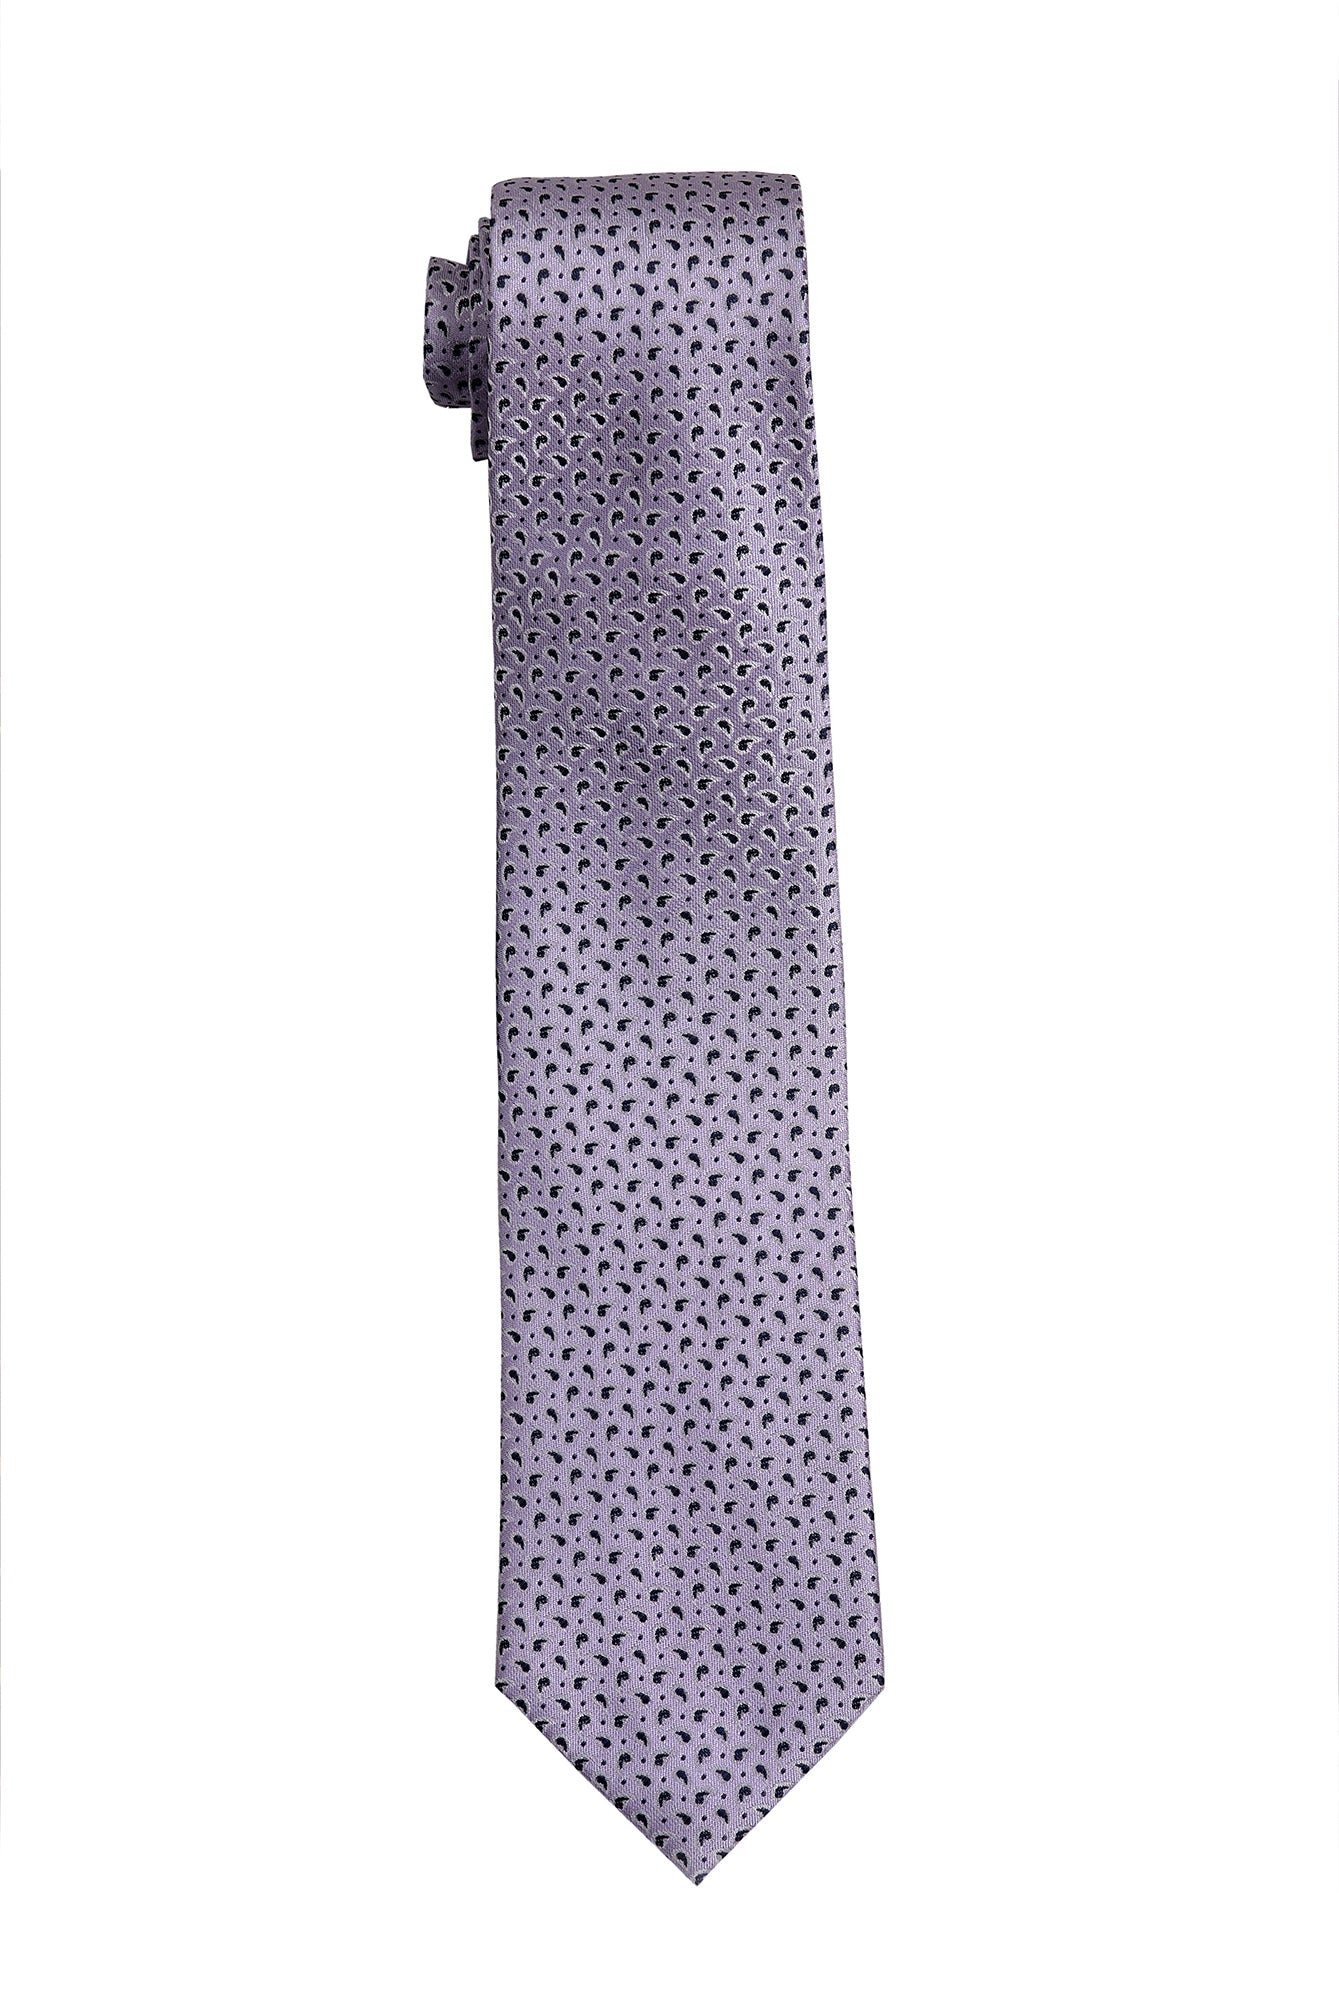 AST3171 POLYESTER WOVEN TIE